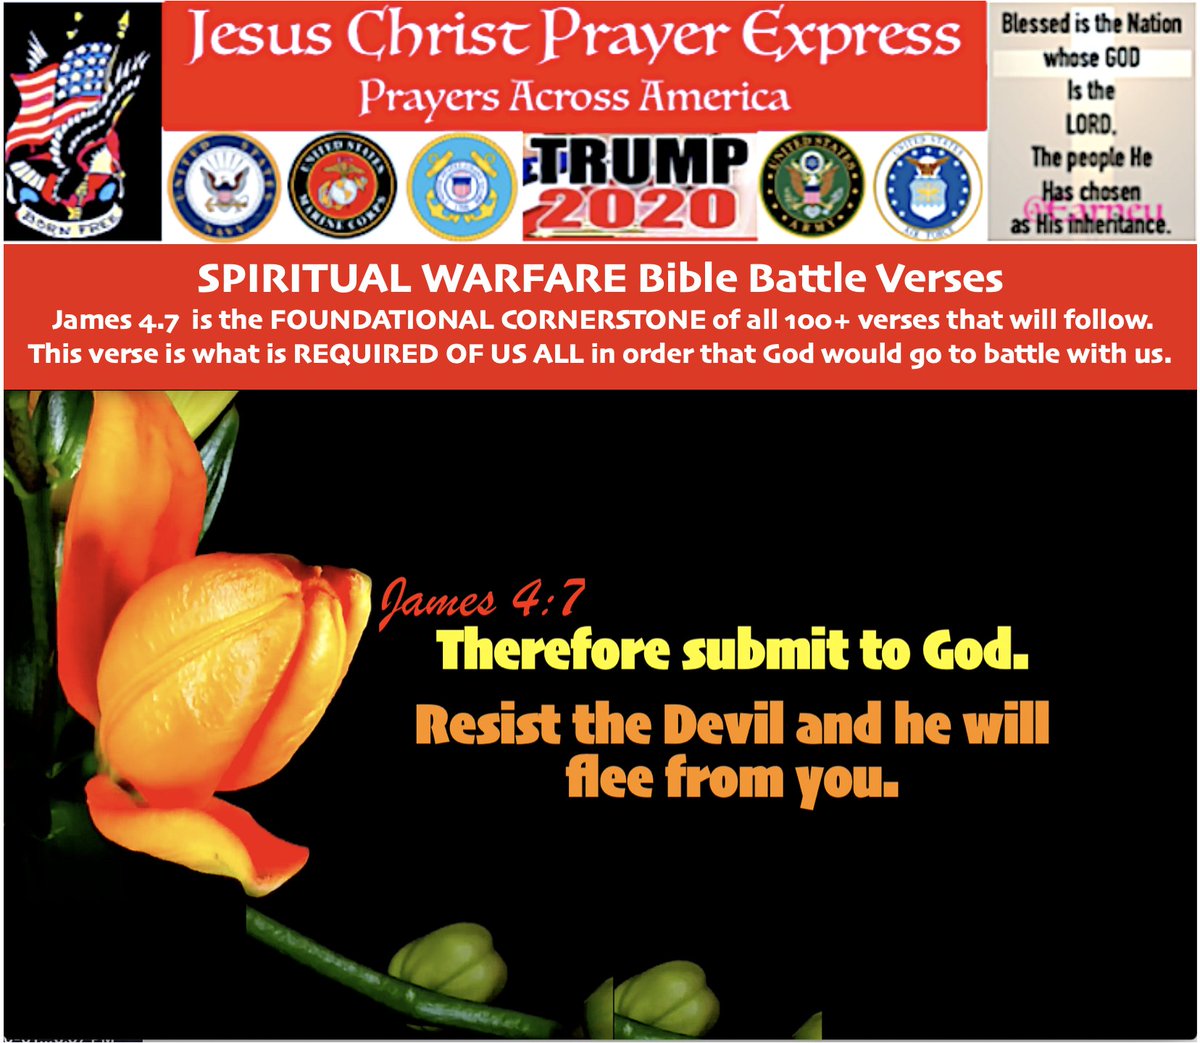 Jesus Christ Prayer Express  #JCPESPIRITUAL WARFARE EDITION:GOD IS A WAR LORDHe is zealous in His defense of YOU, His creation.2. There is a PREREQUISITE: FULL SUBMISSION